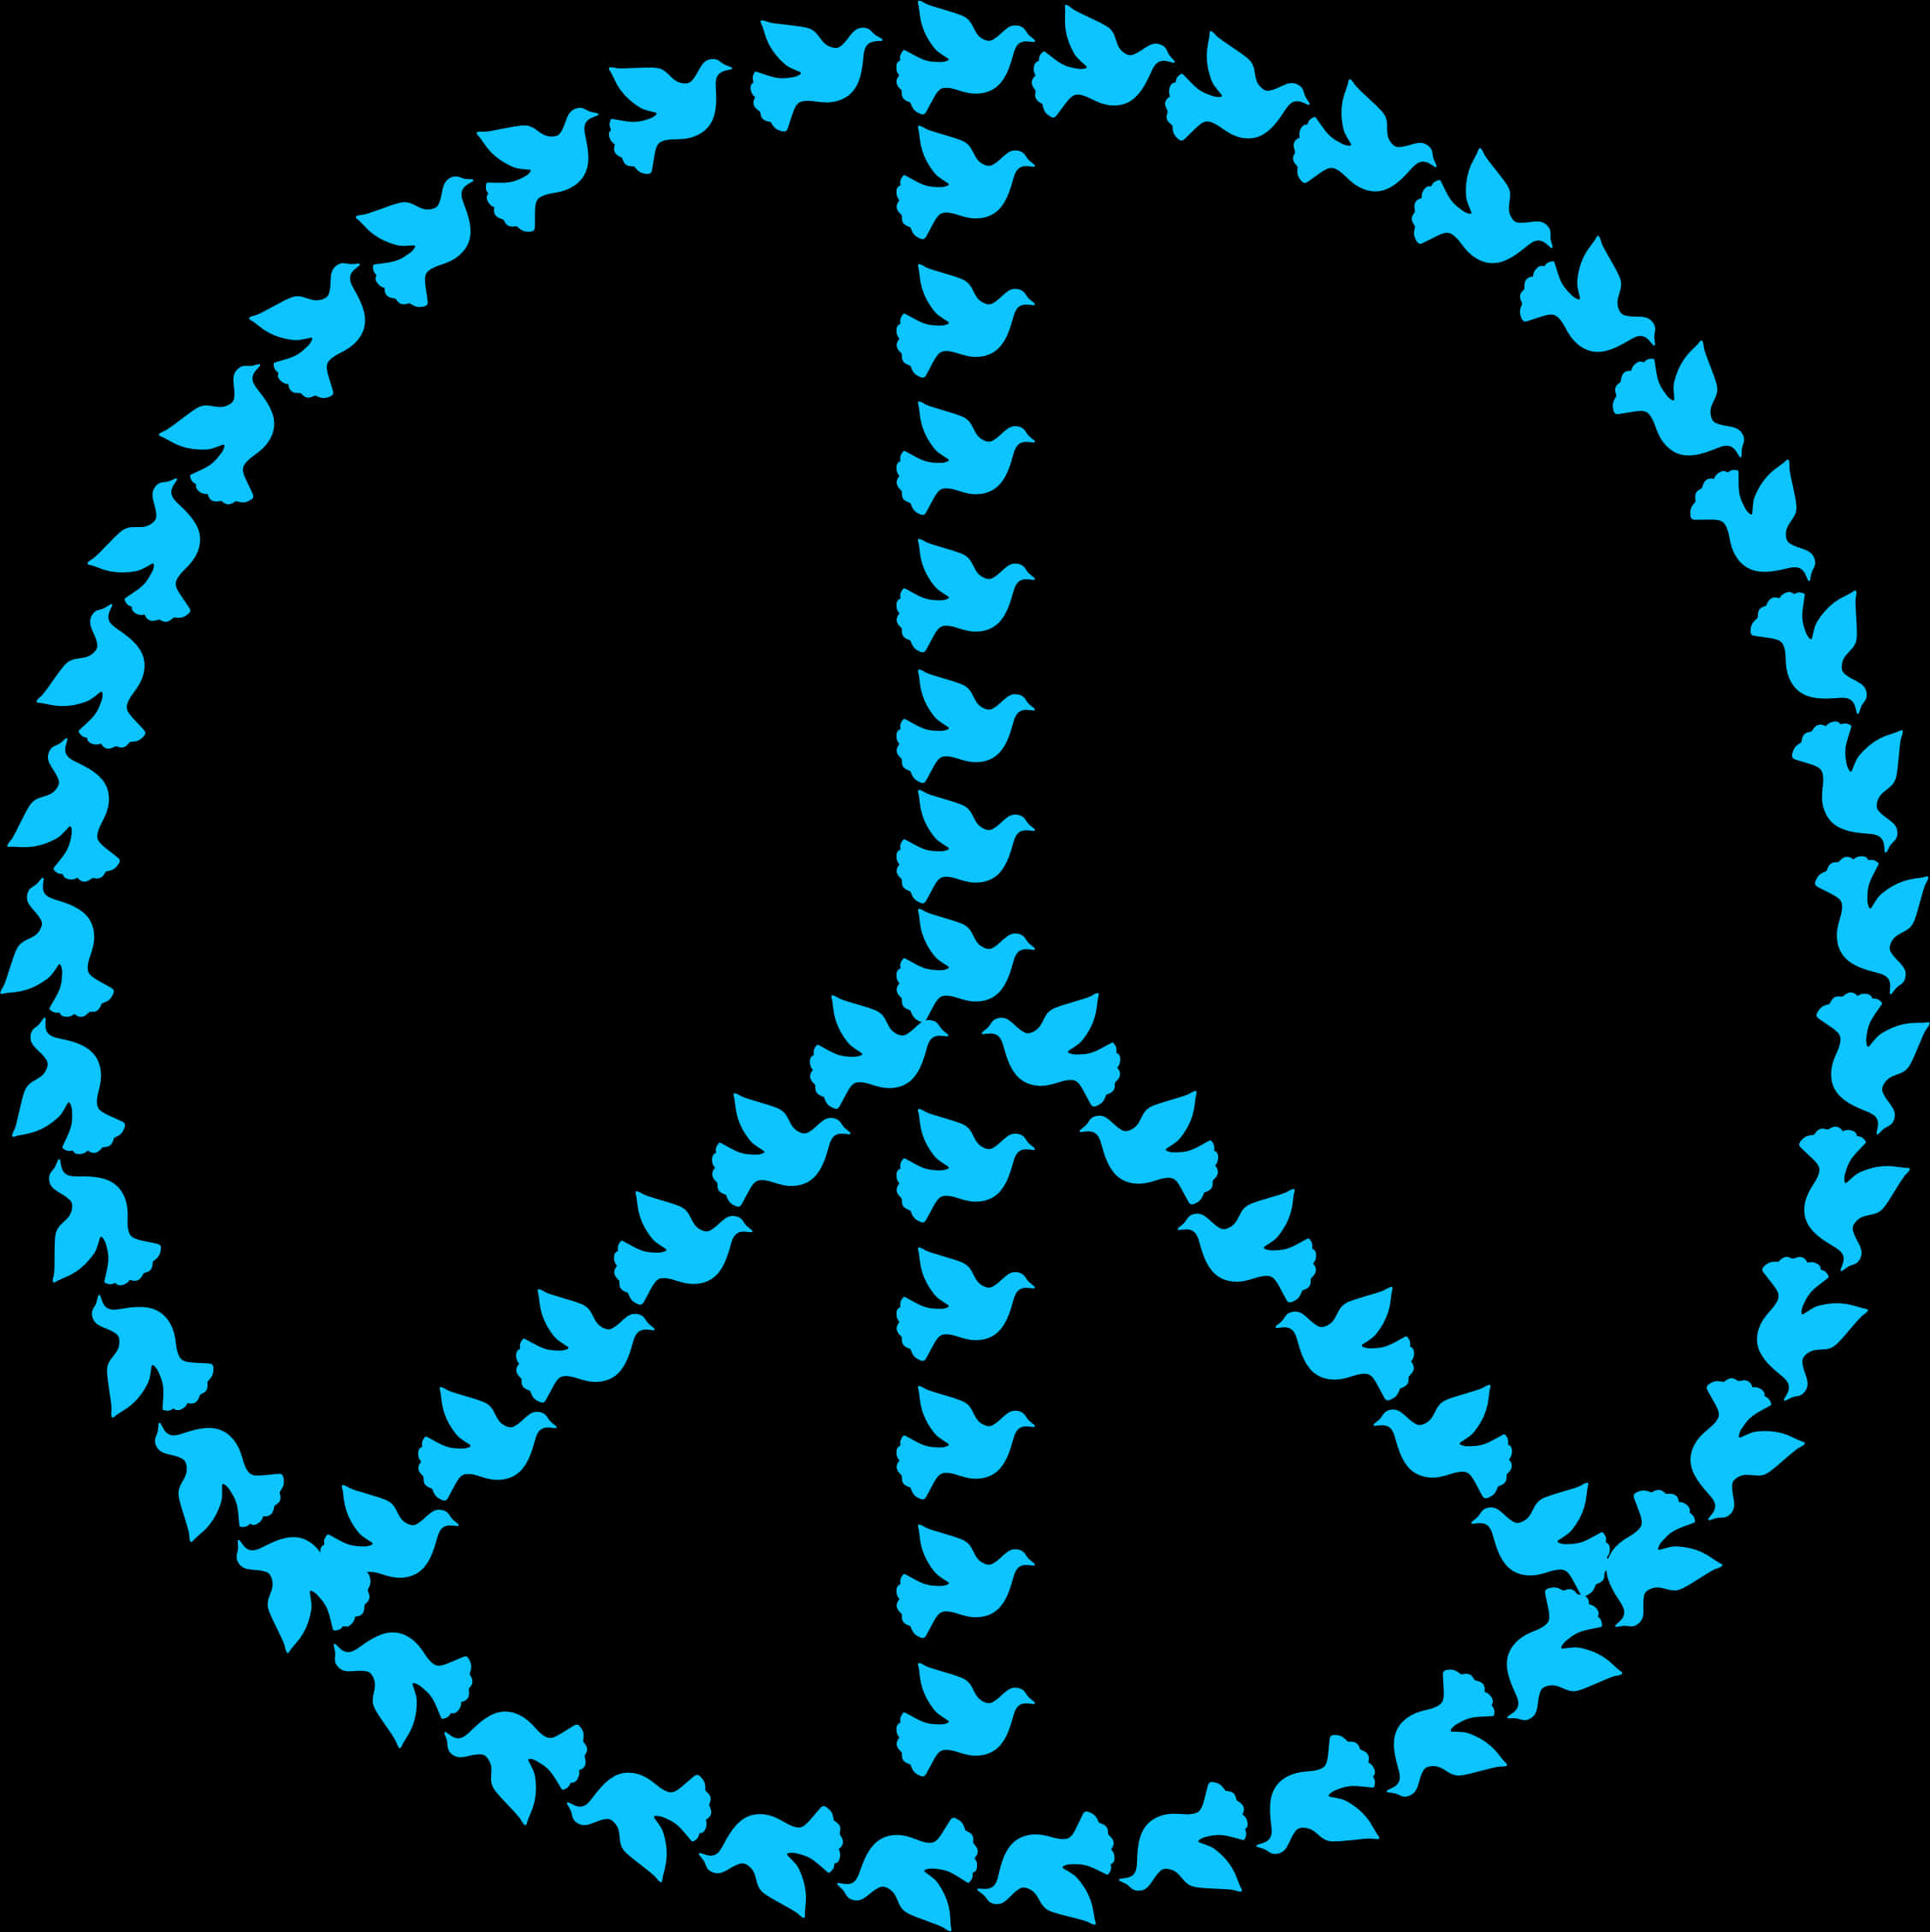 A Peace Sign Made Of Blue Birds